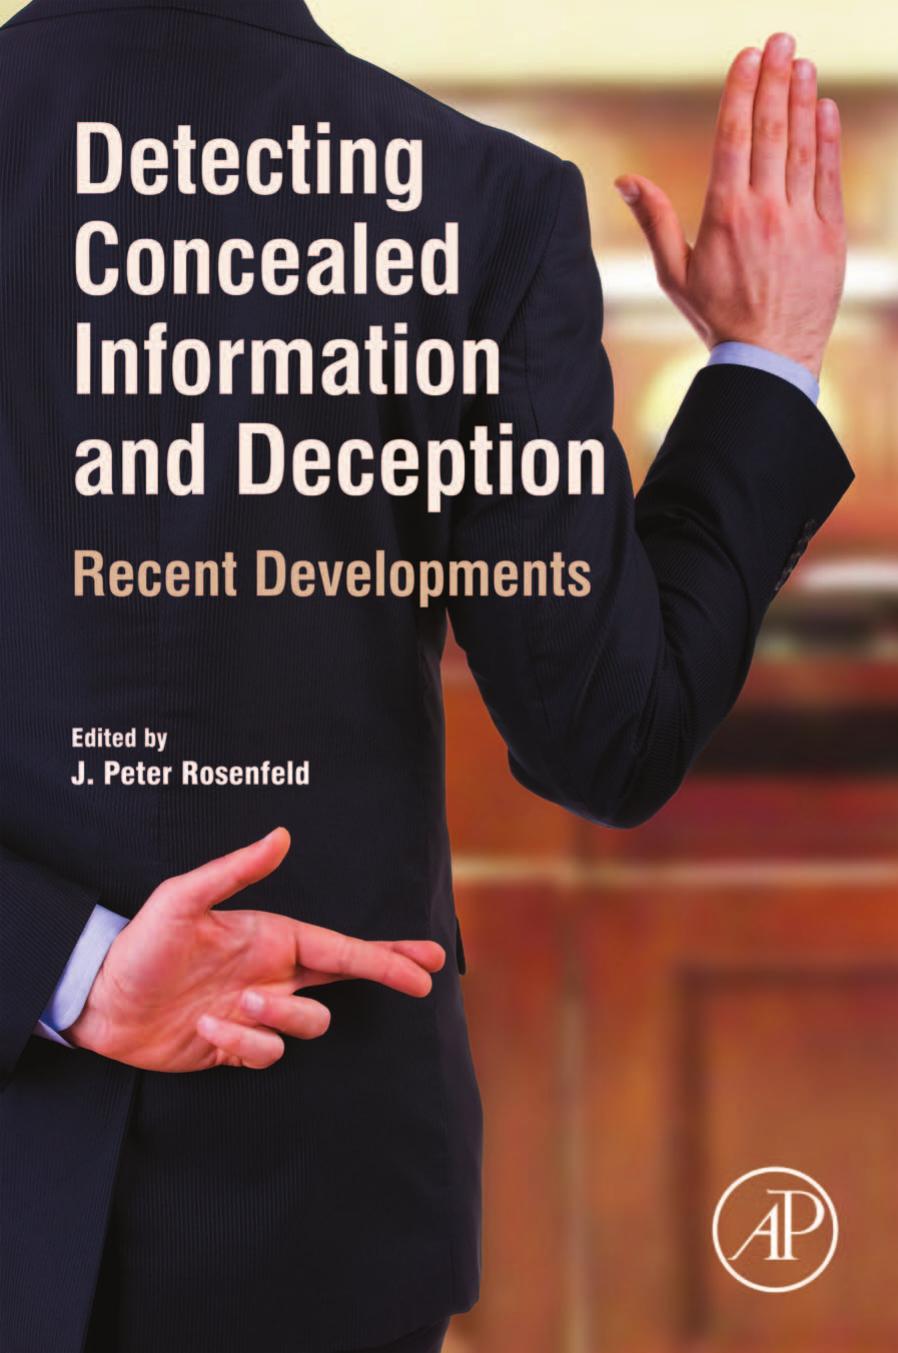 Detecting Concealed Information and Deception: Recent Developments